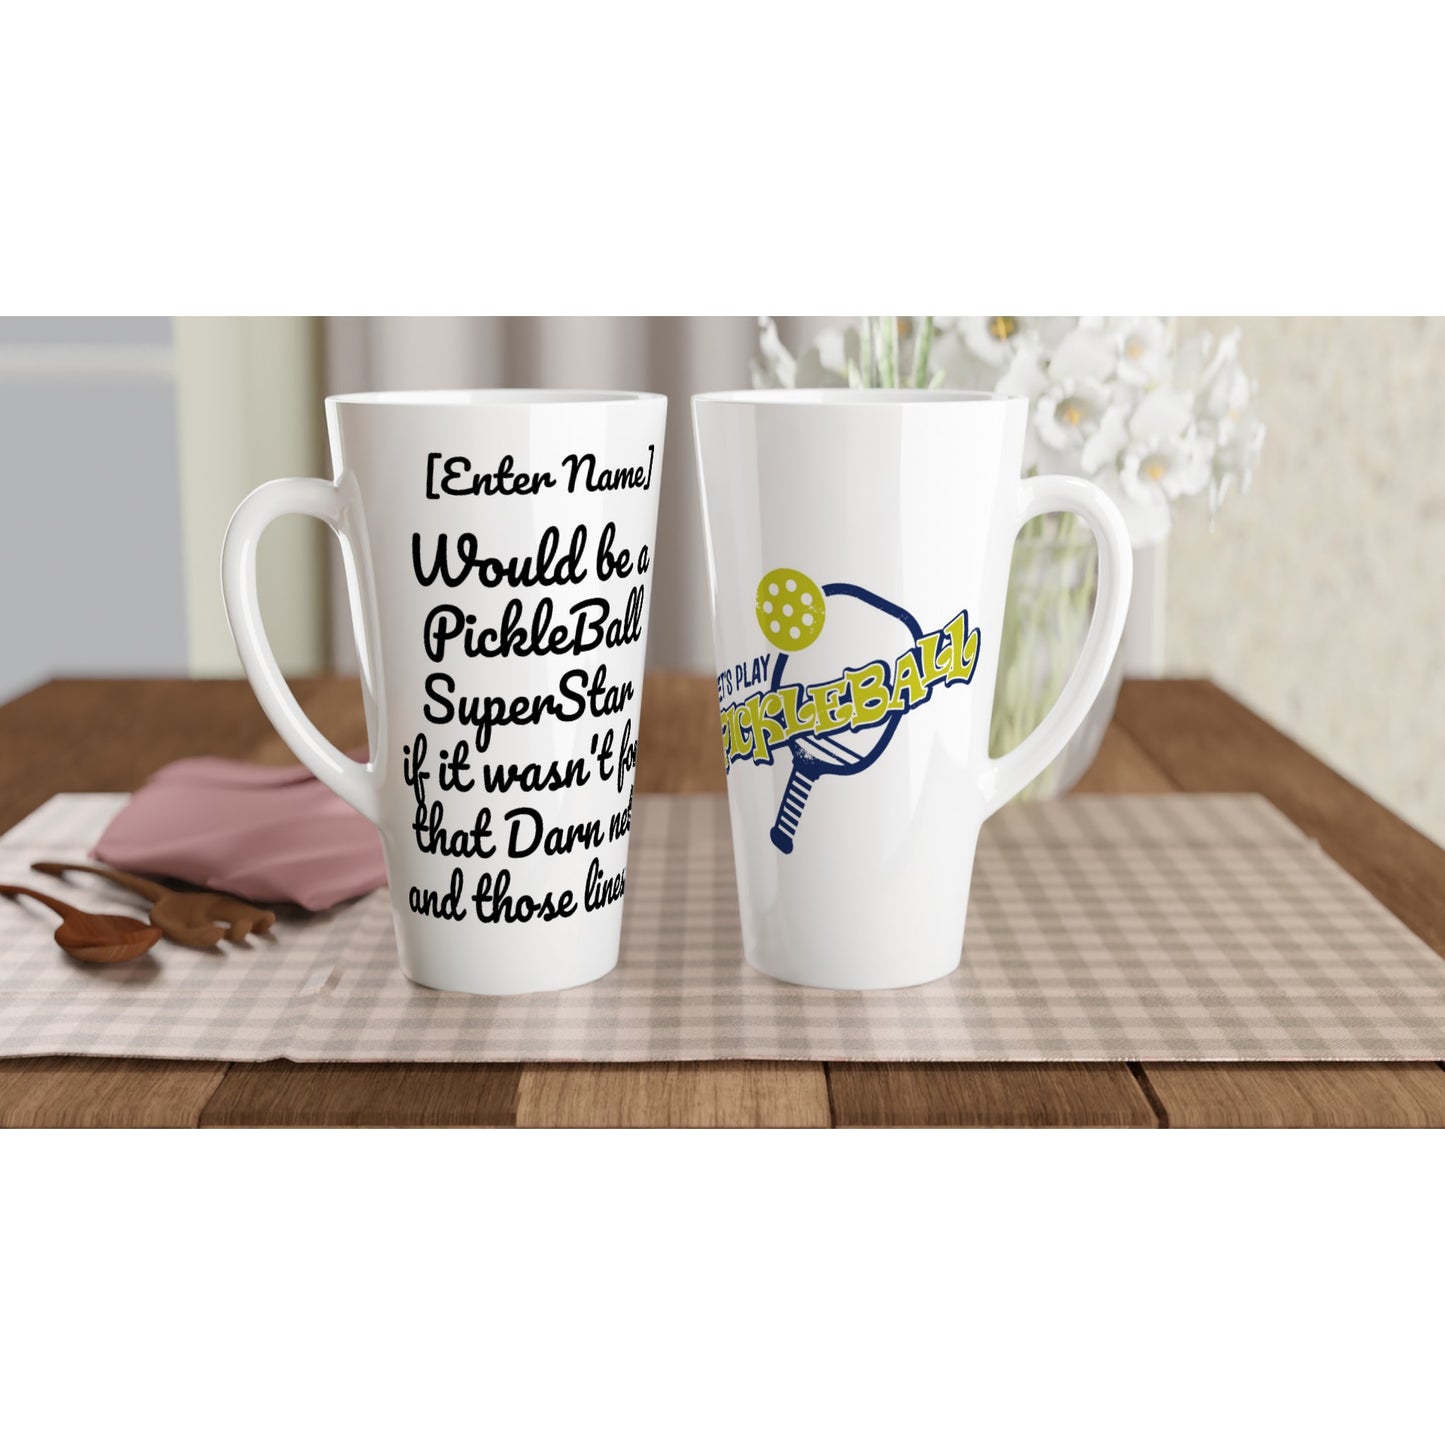 Two Personalized Seventeener white ceramic 17oz mug with original personalized motto [Your Name] Would be a PickleBall SuperStar if it wasn’t for that Darn net and those lines! on front and Let’s Play Pickleball logo on back coffee mug dishwasher and microwave safe from WhatYa Say Apparel sitting on coffee table with green and white placemat.